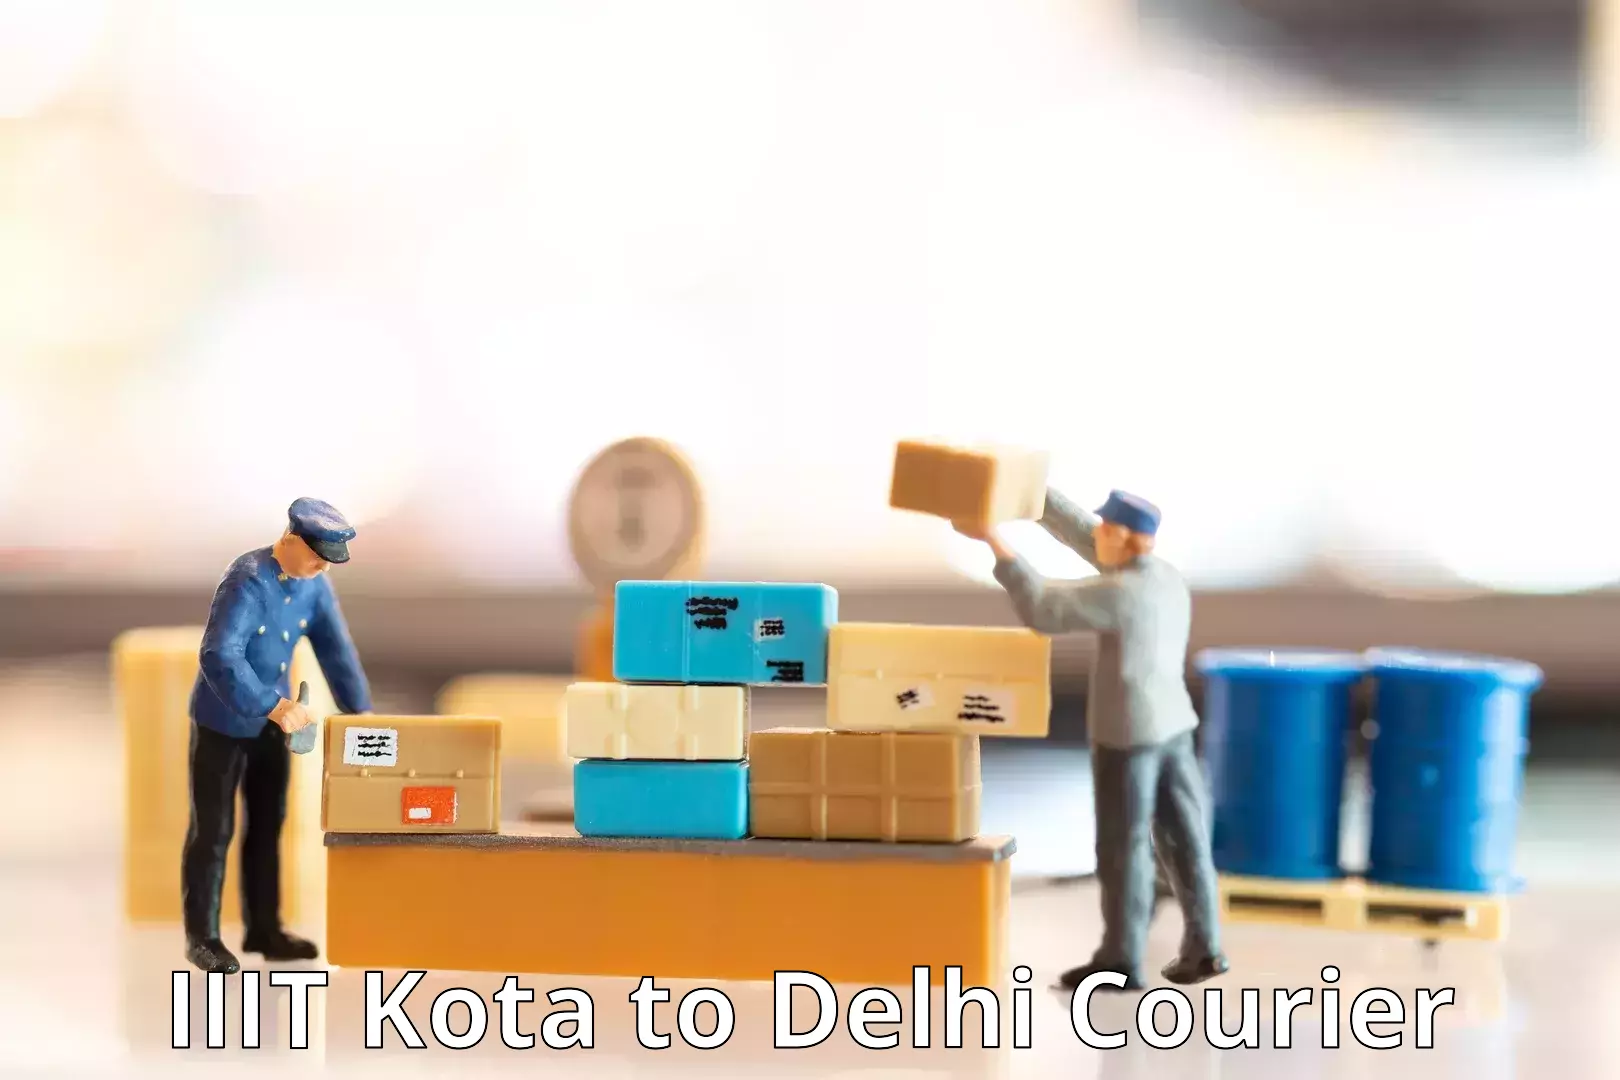 State-of-the-art courier technology IIIT Kota to Indraprastha